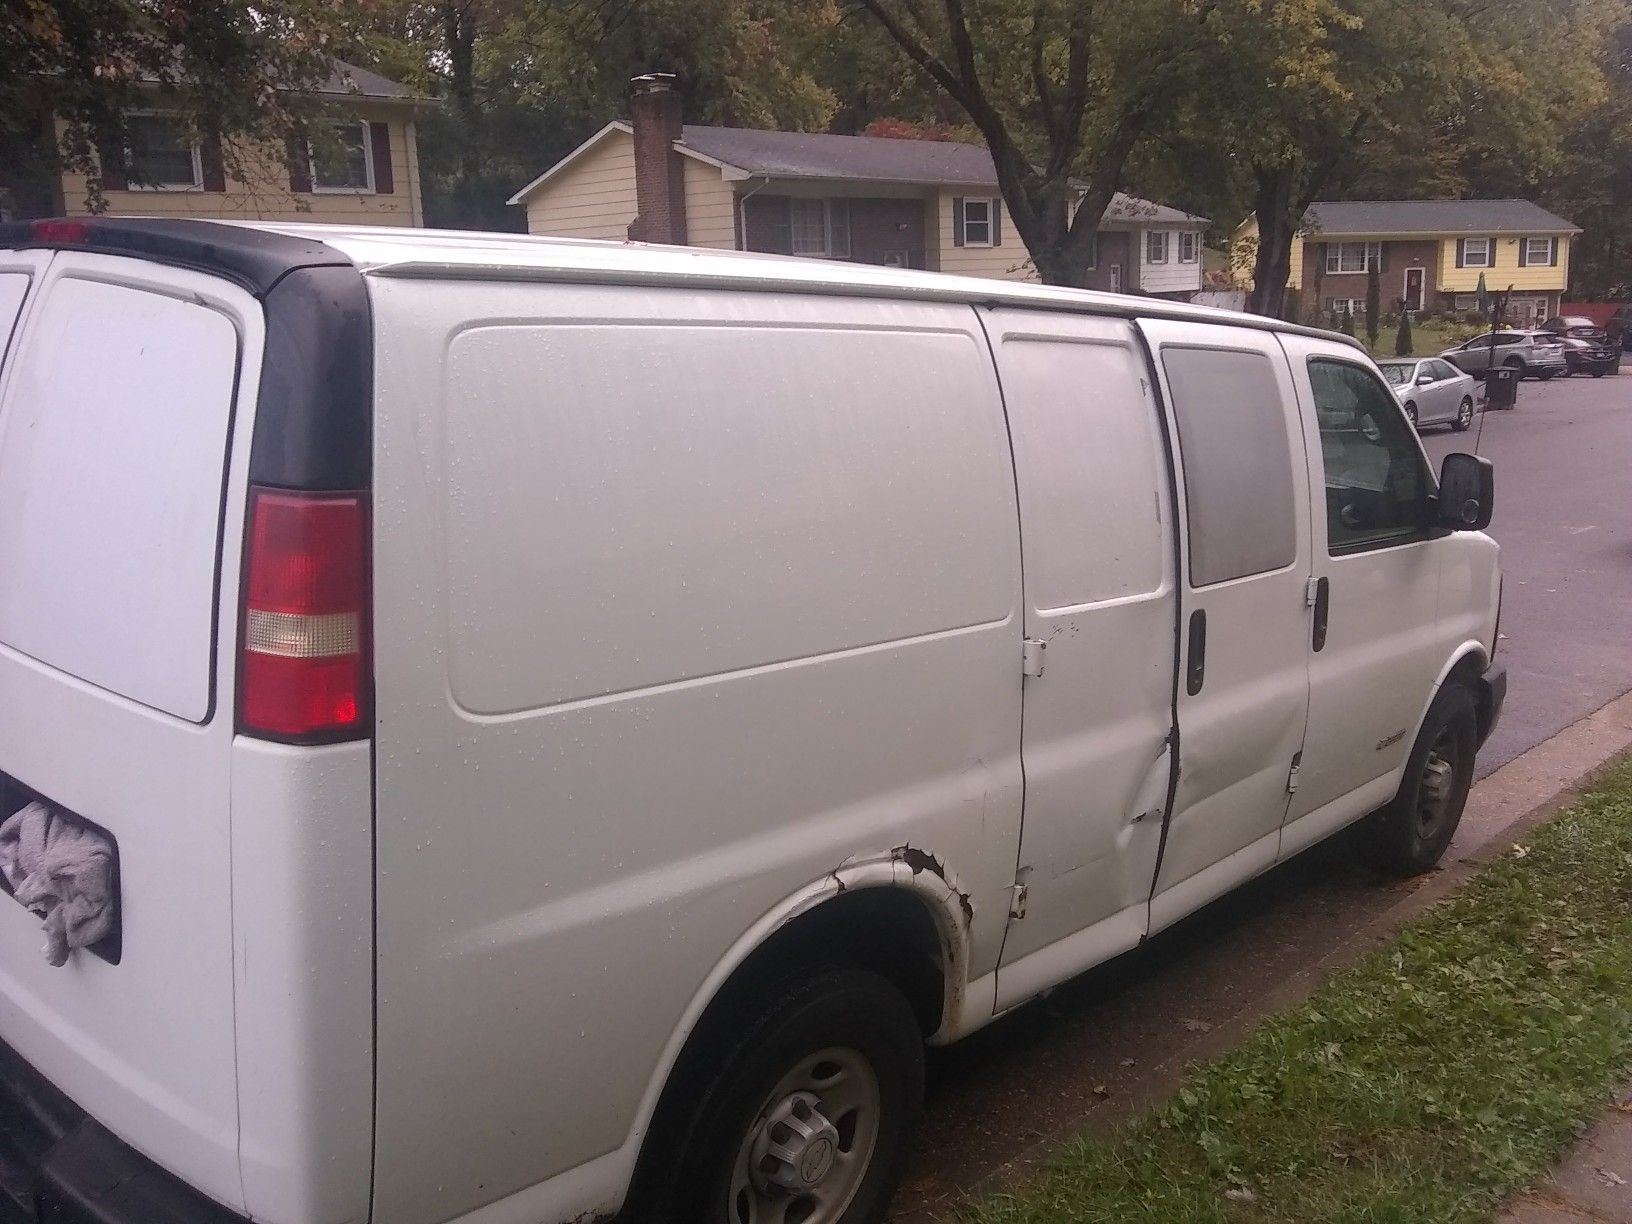 2006 Chevy express 2500